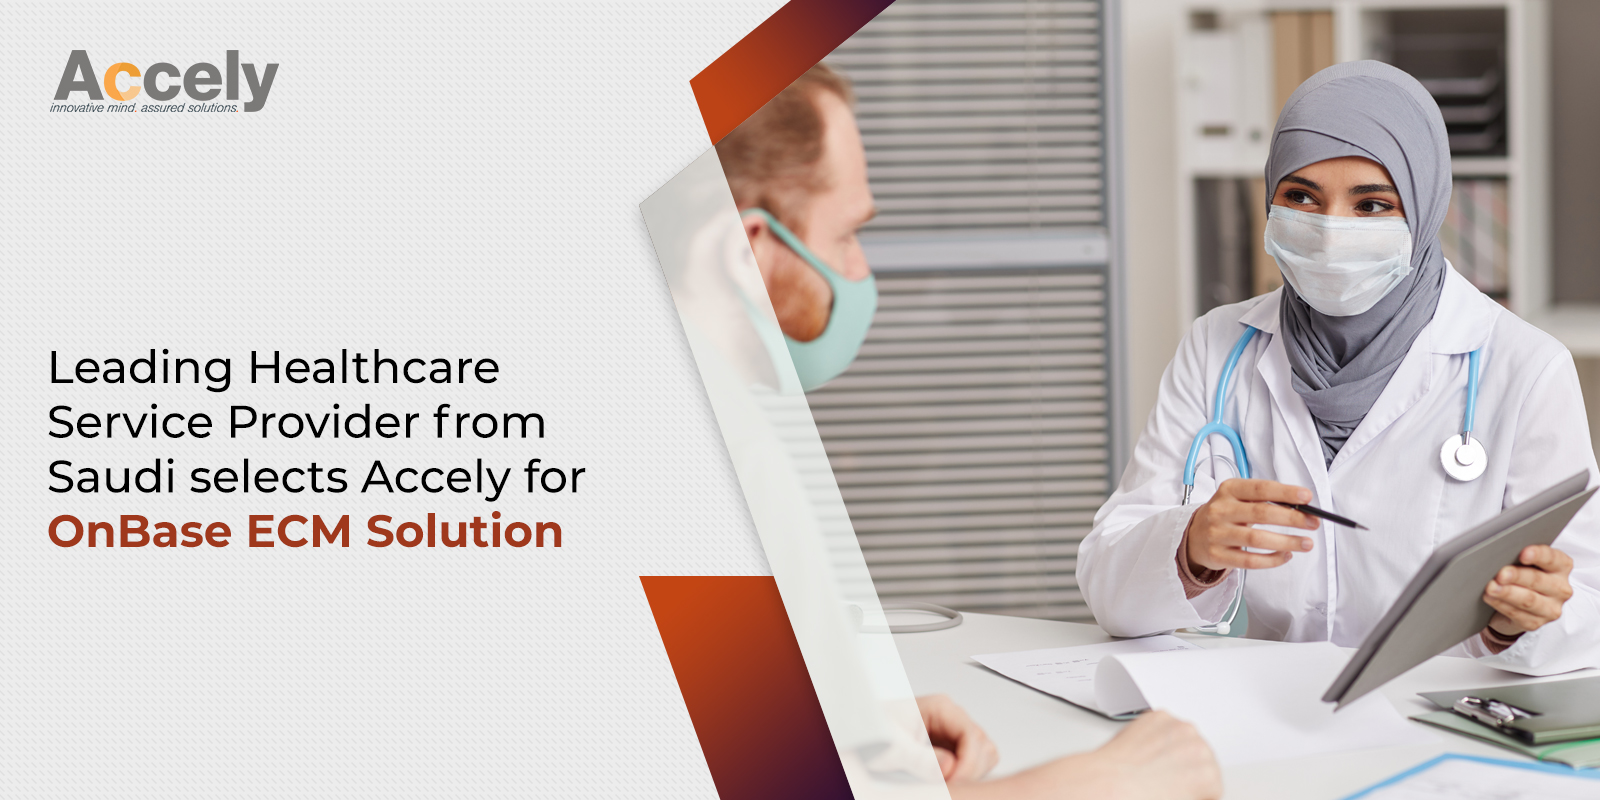 Leading Healthcare Service Providers from Saudi join hands with Accely for OnBase ECM Solution